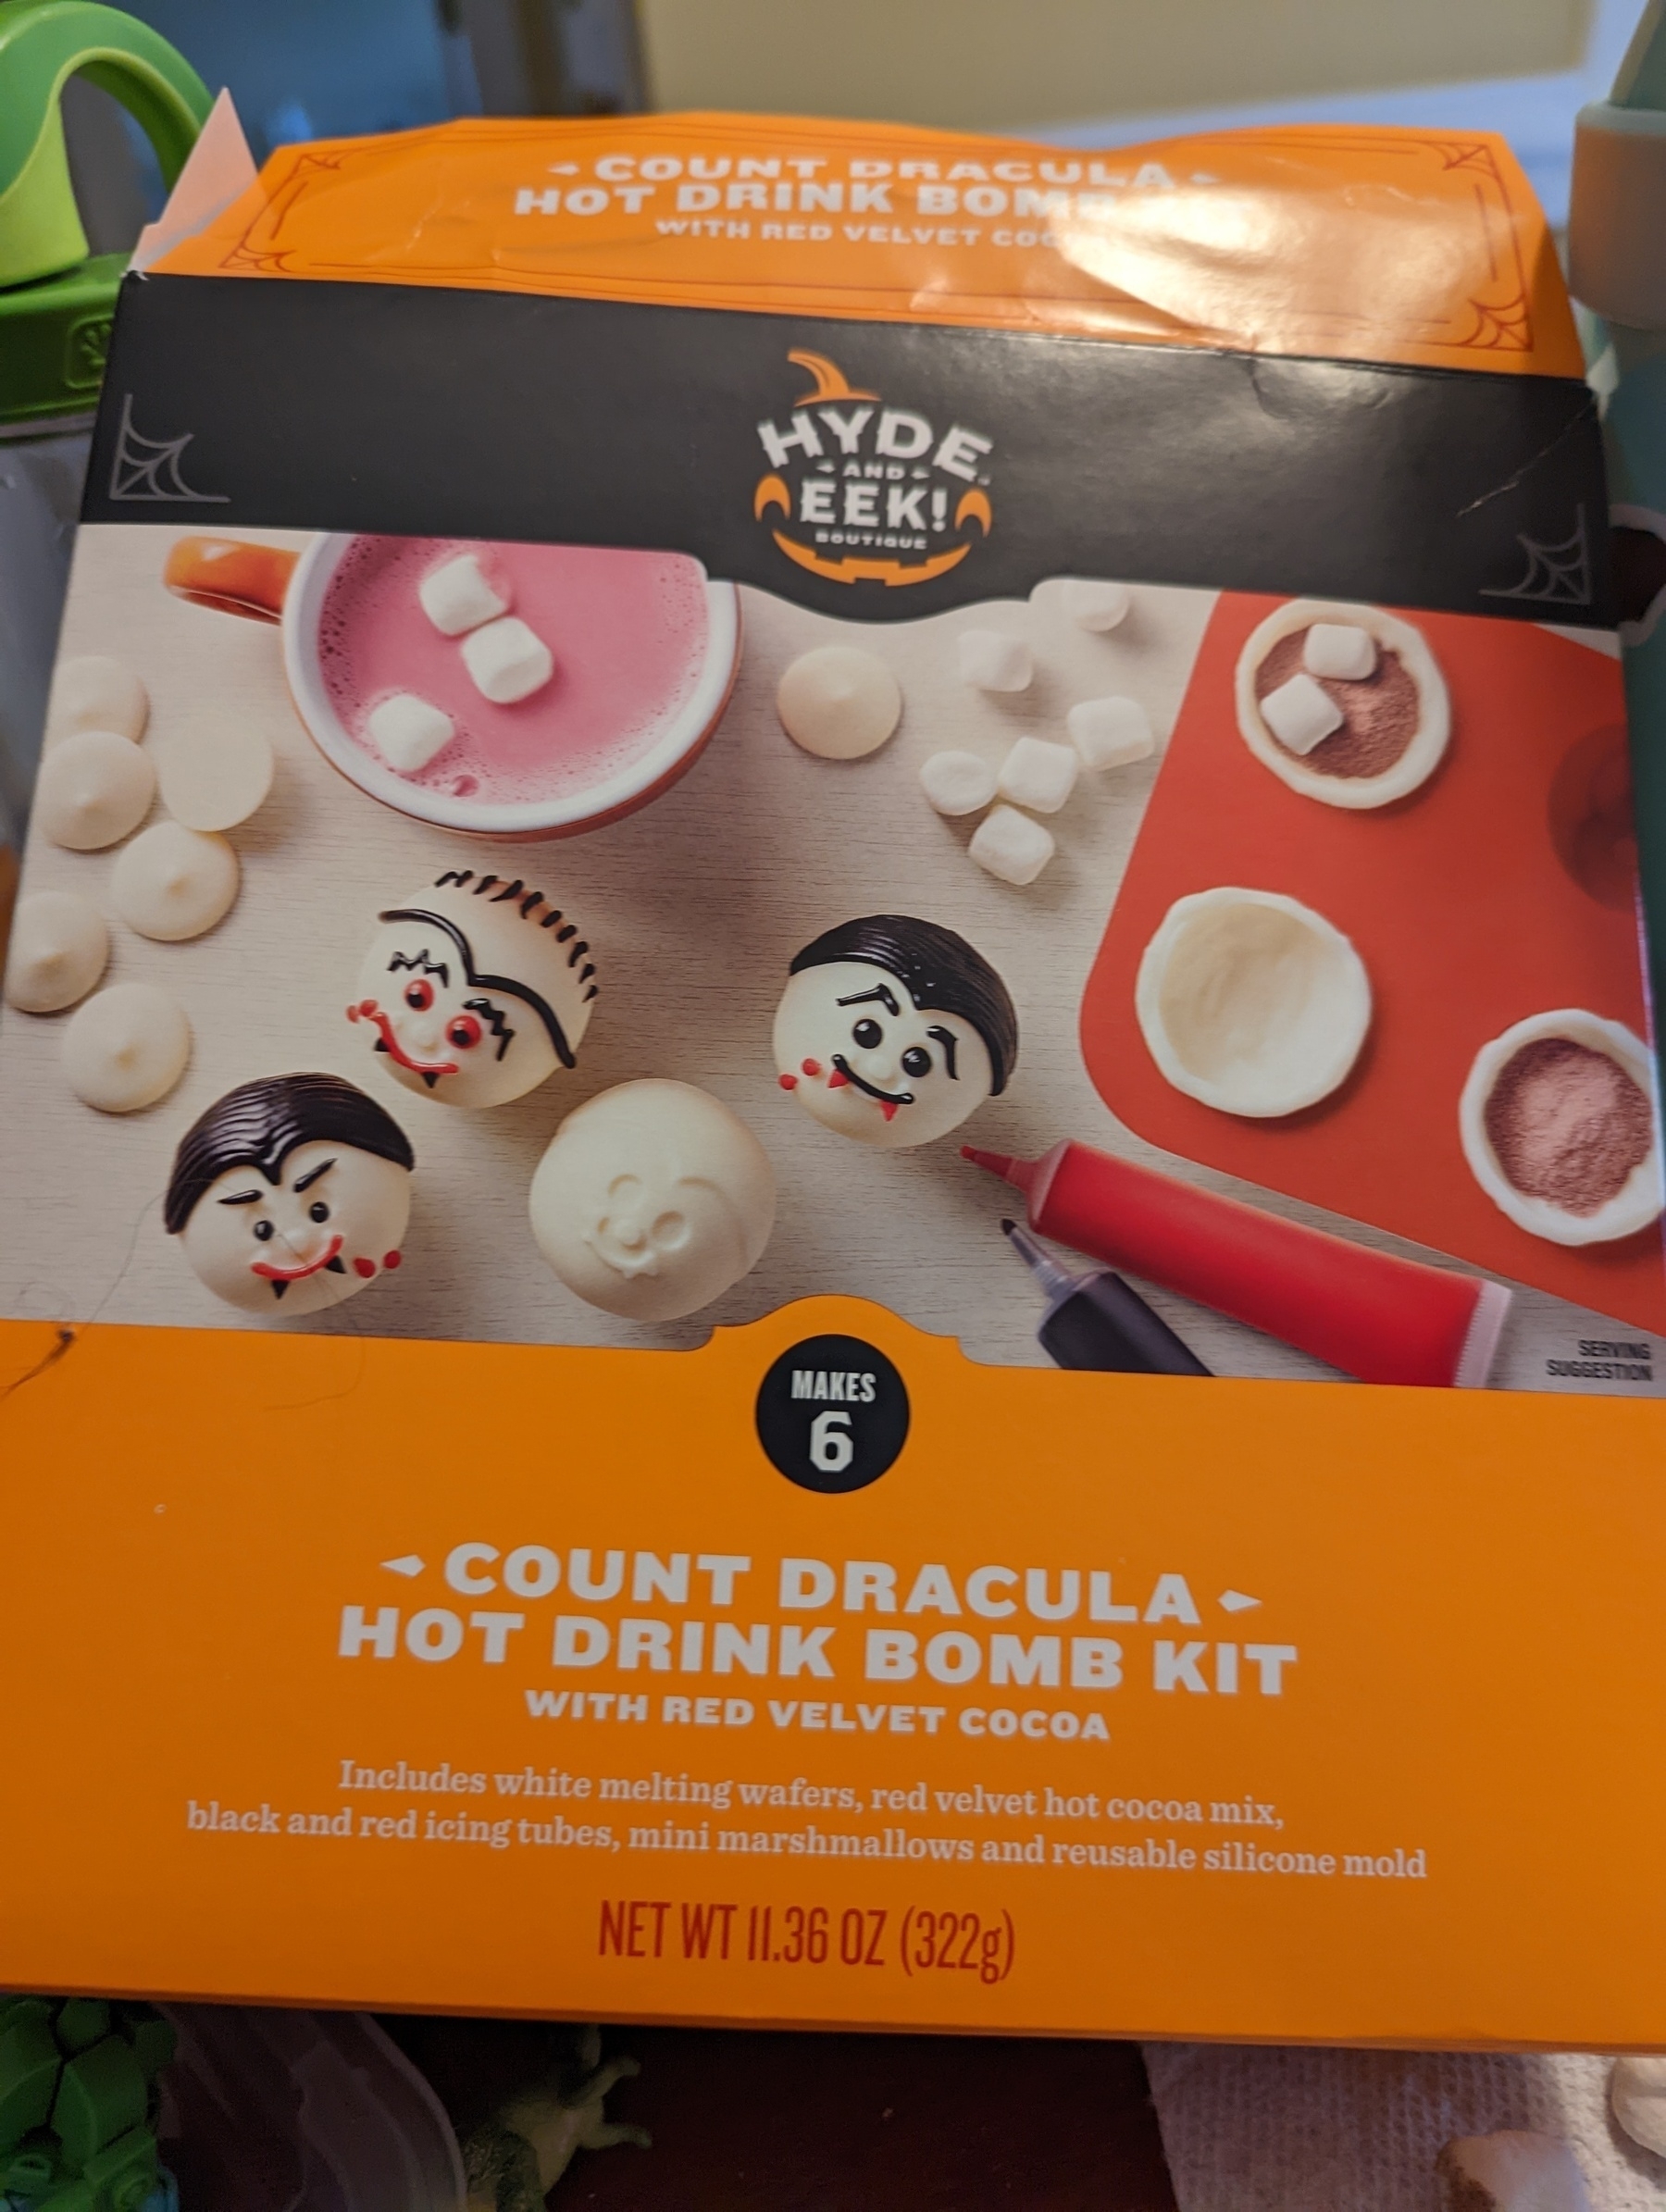 A box depicting beautifully painted hot cocoa bombs, reading "Count Dracula Hot Drink Bomb Kit"